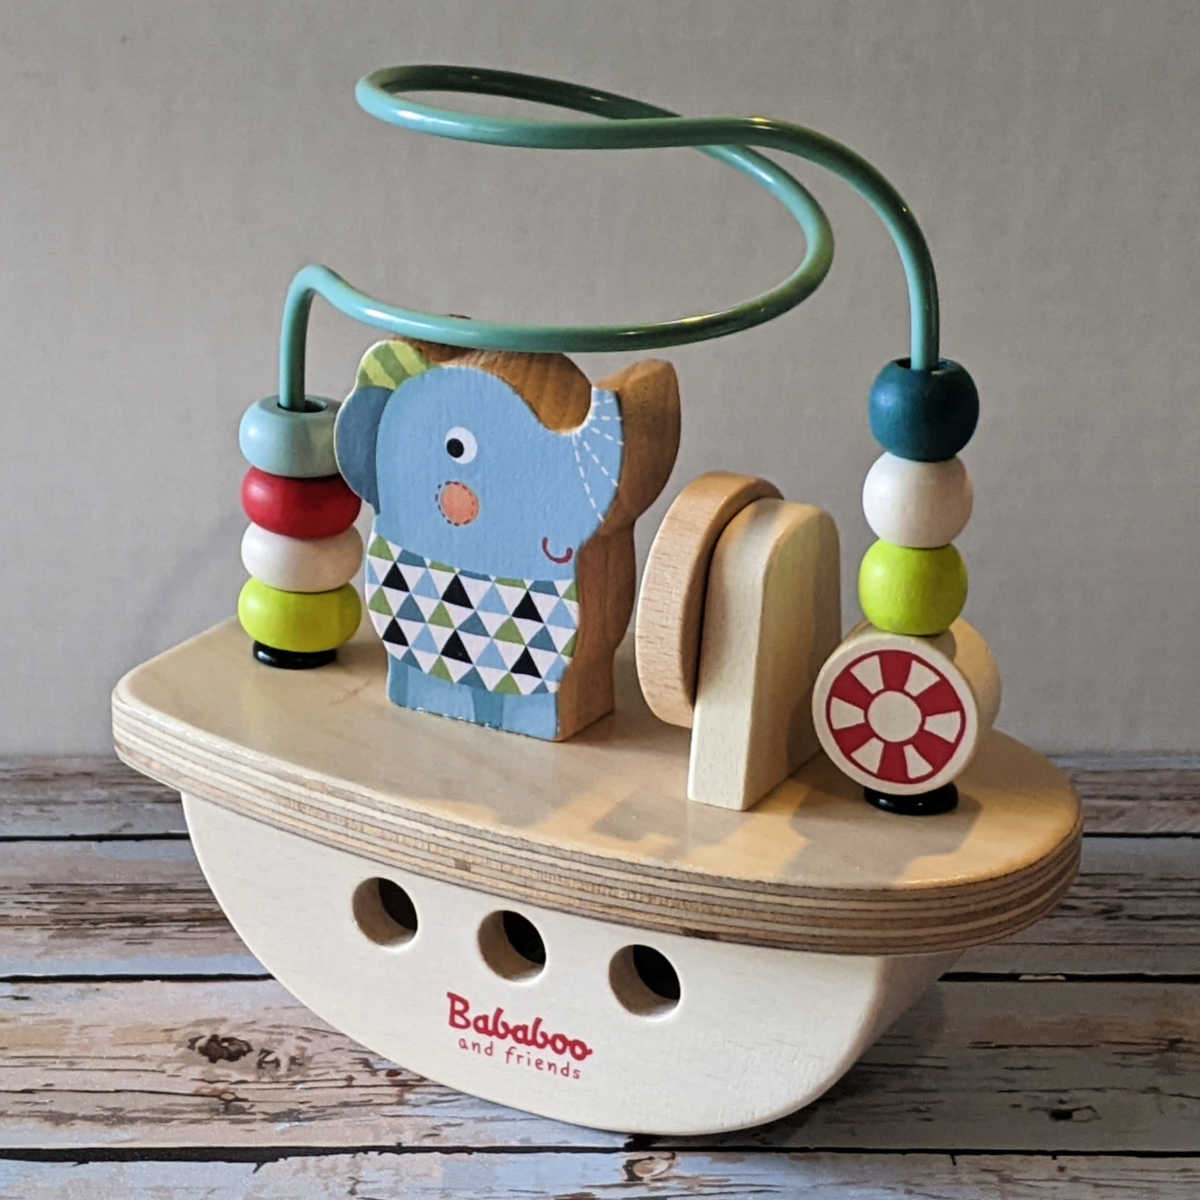 lolos boat bababoo wood toy